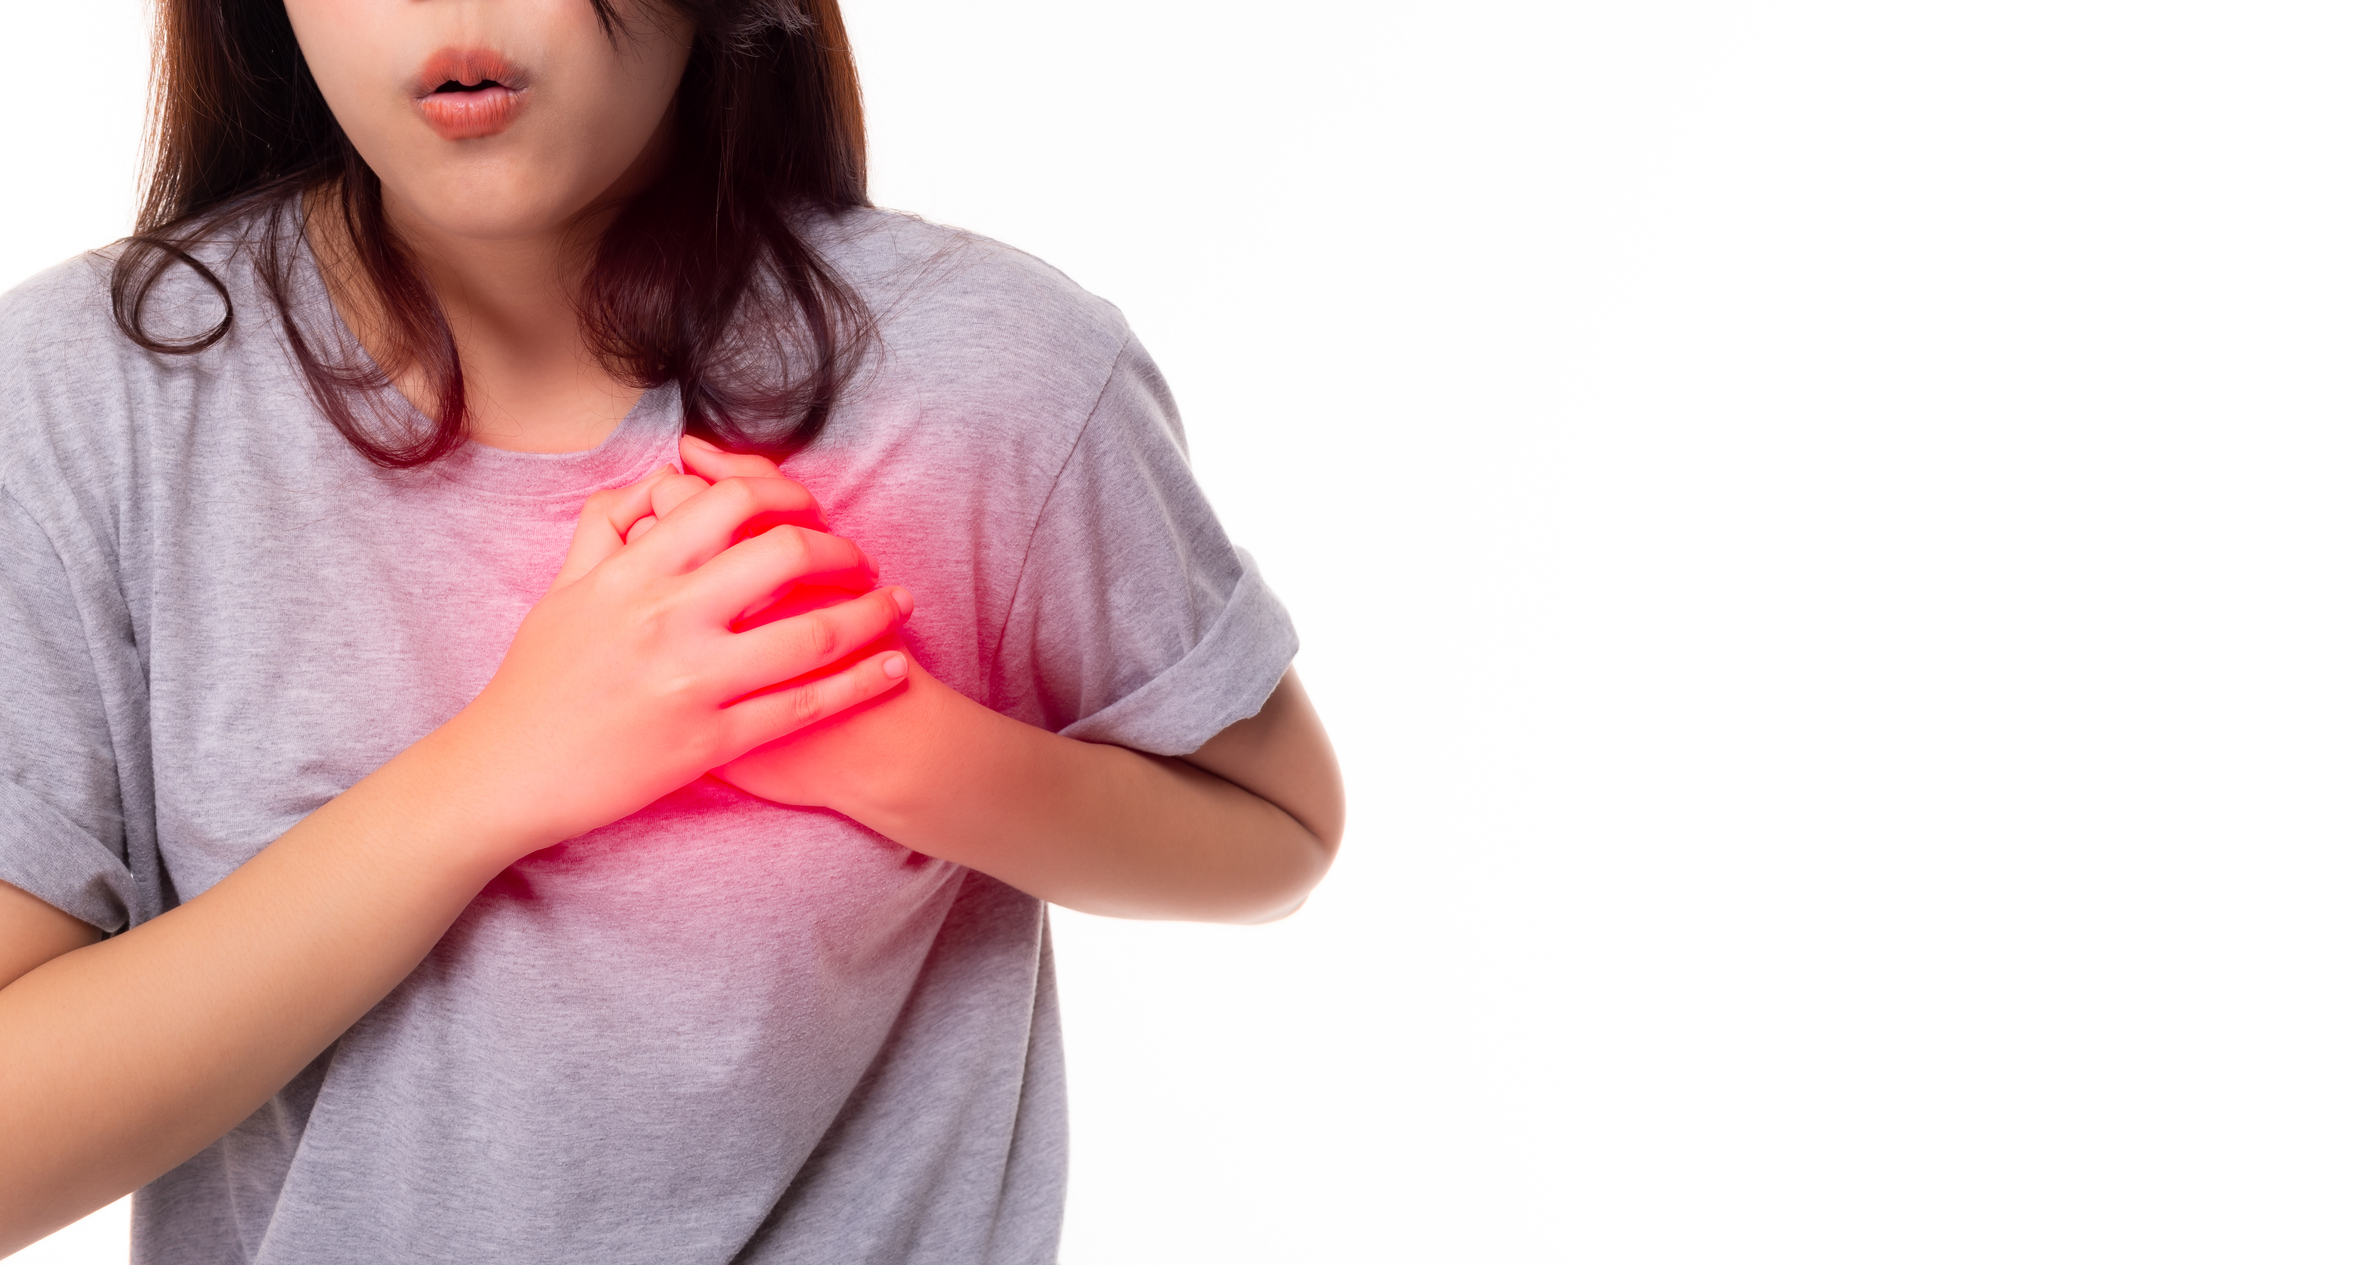 Young woman clutching chest in pain